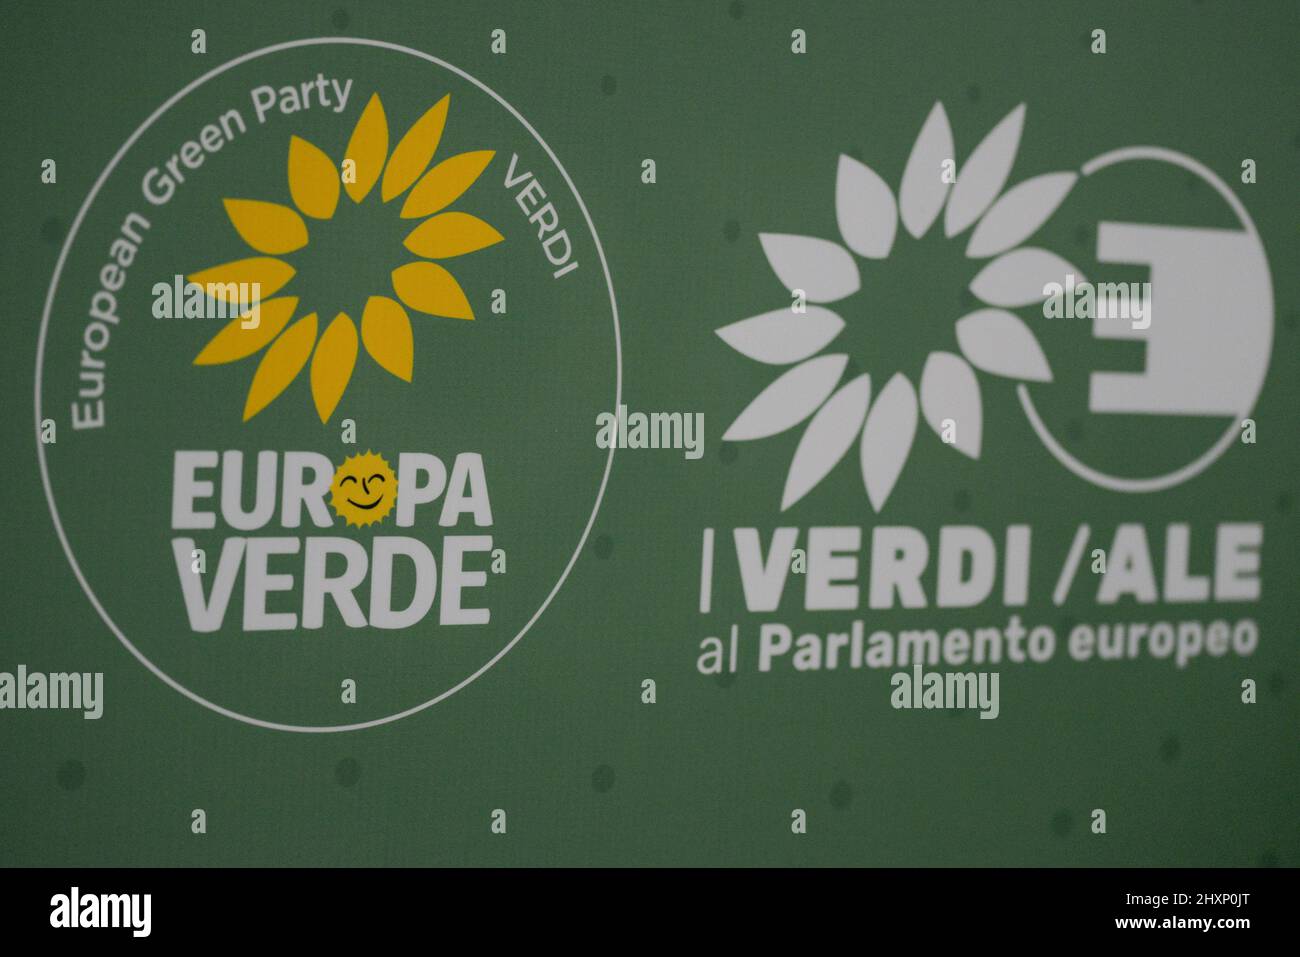 Rome, Italy. 13th Mar, 2022. Europa Verde, logo during 'Italy without poisons. No to war', programmatic conference of Europa Verde and the European Green Party Verdi., News in Rome, Italy, March 13 2022 Credit: Independent Photo Agency/Alamy Live News Stock Photo